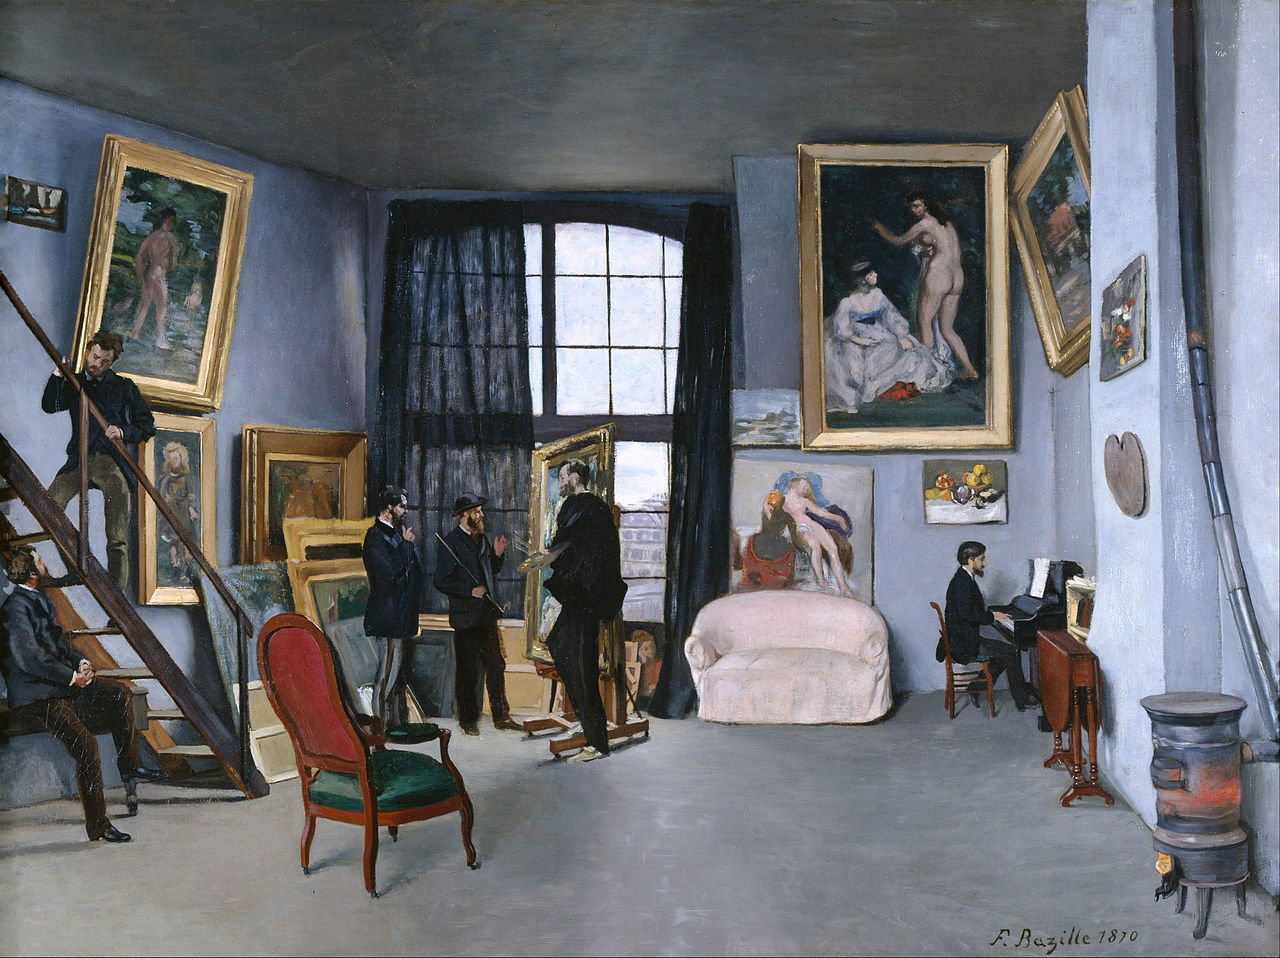 Frédéric Bazille (with additions by Édouard Manet). Bazille's Studio. 1870.Oil on canvas. 38½ × 50½ in. Musée d'Orsay, Paris.